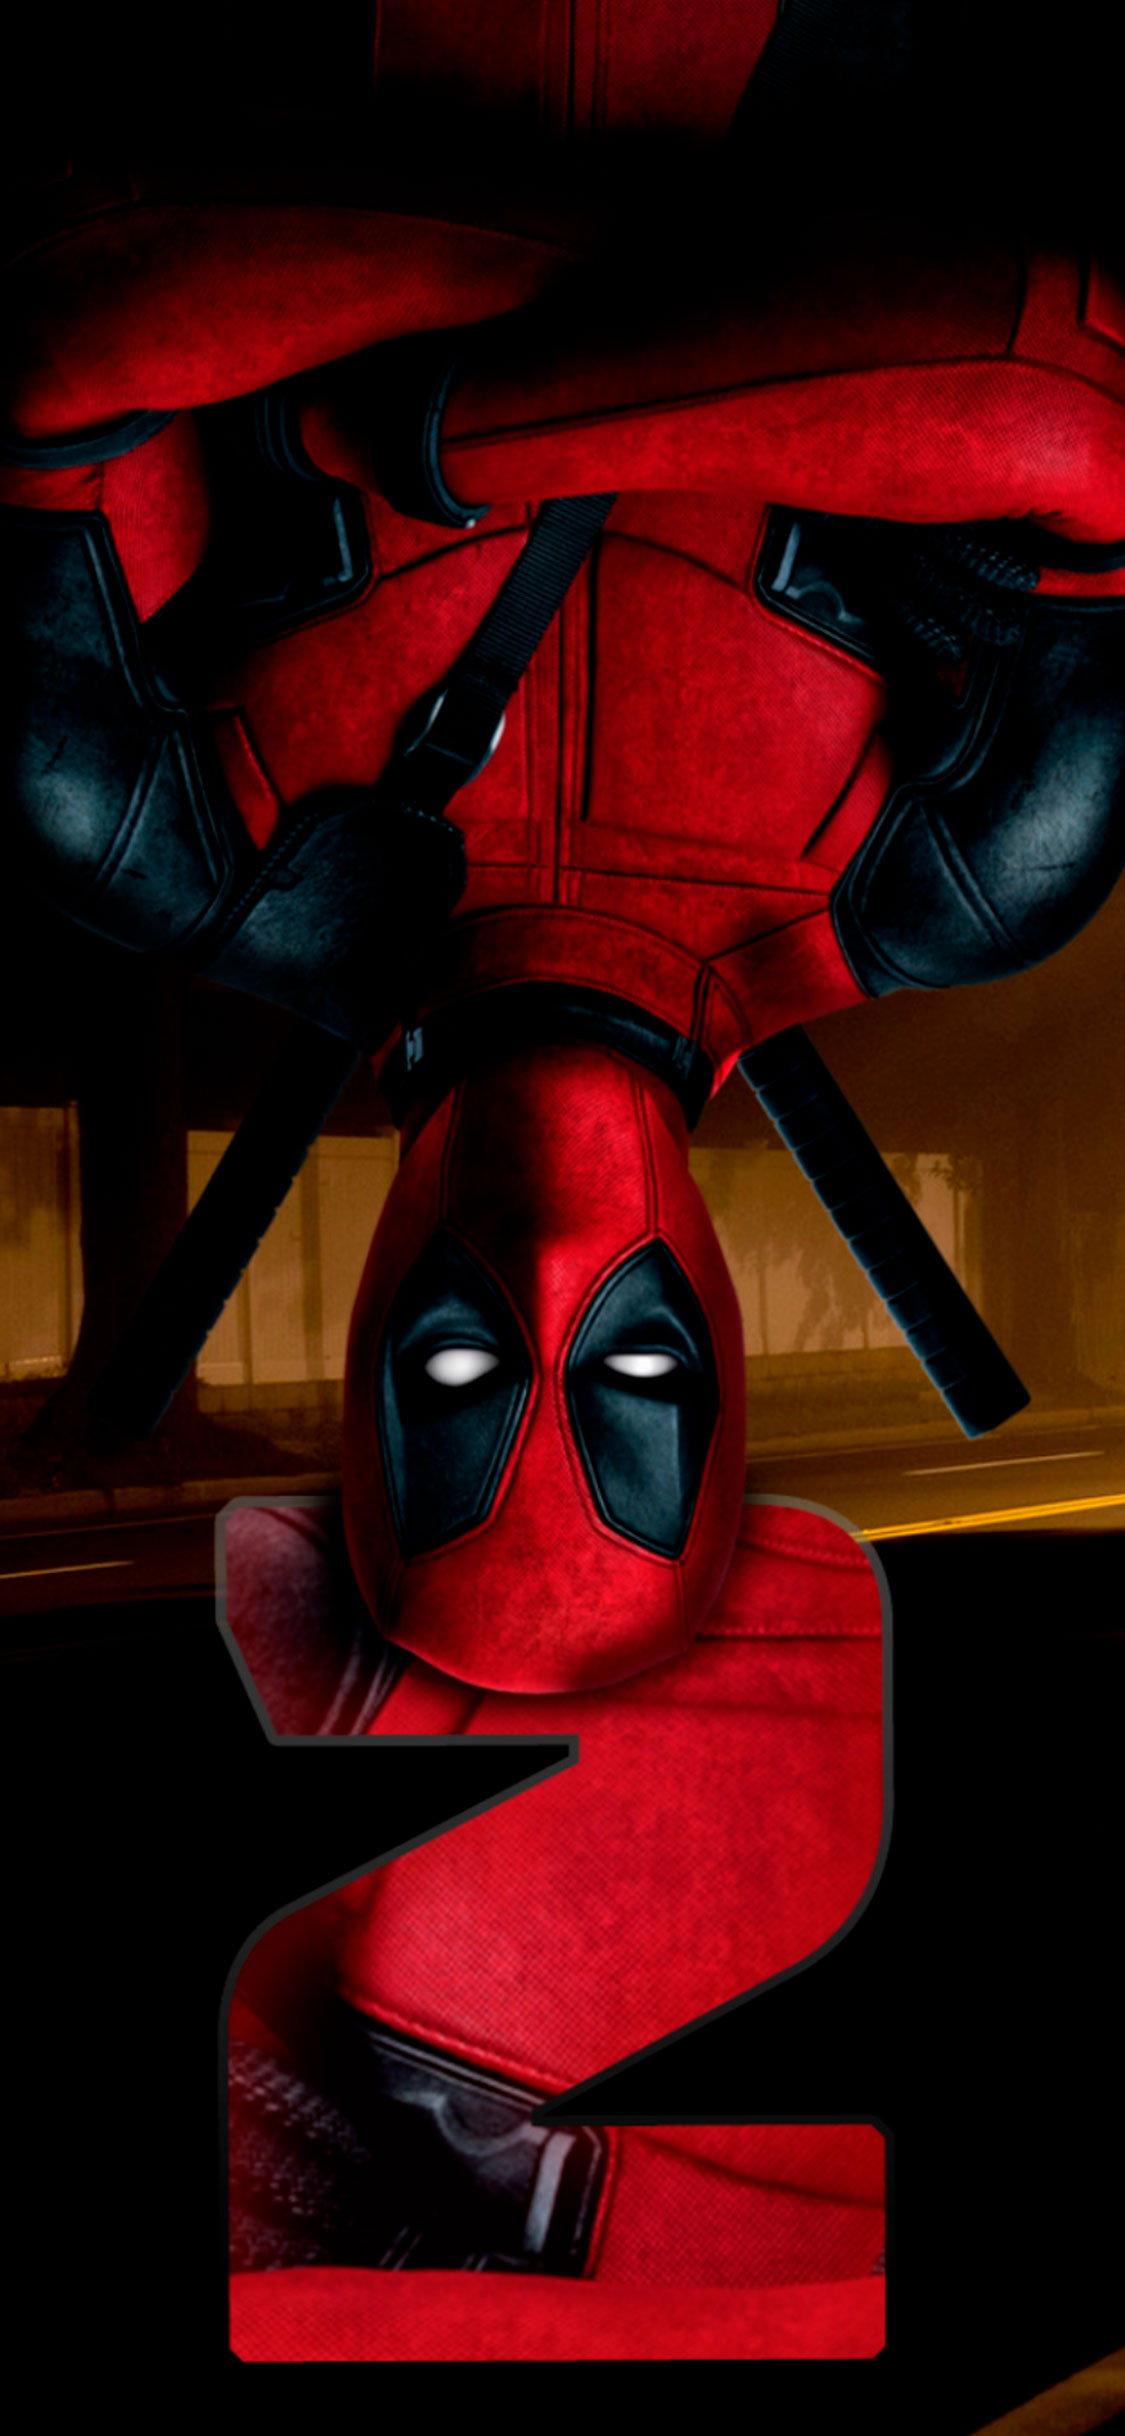 Deadpool Wallpaper For iPhone X On